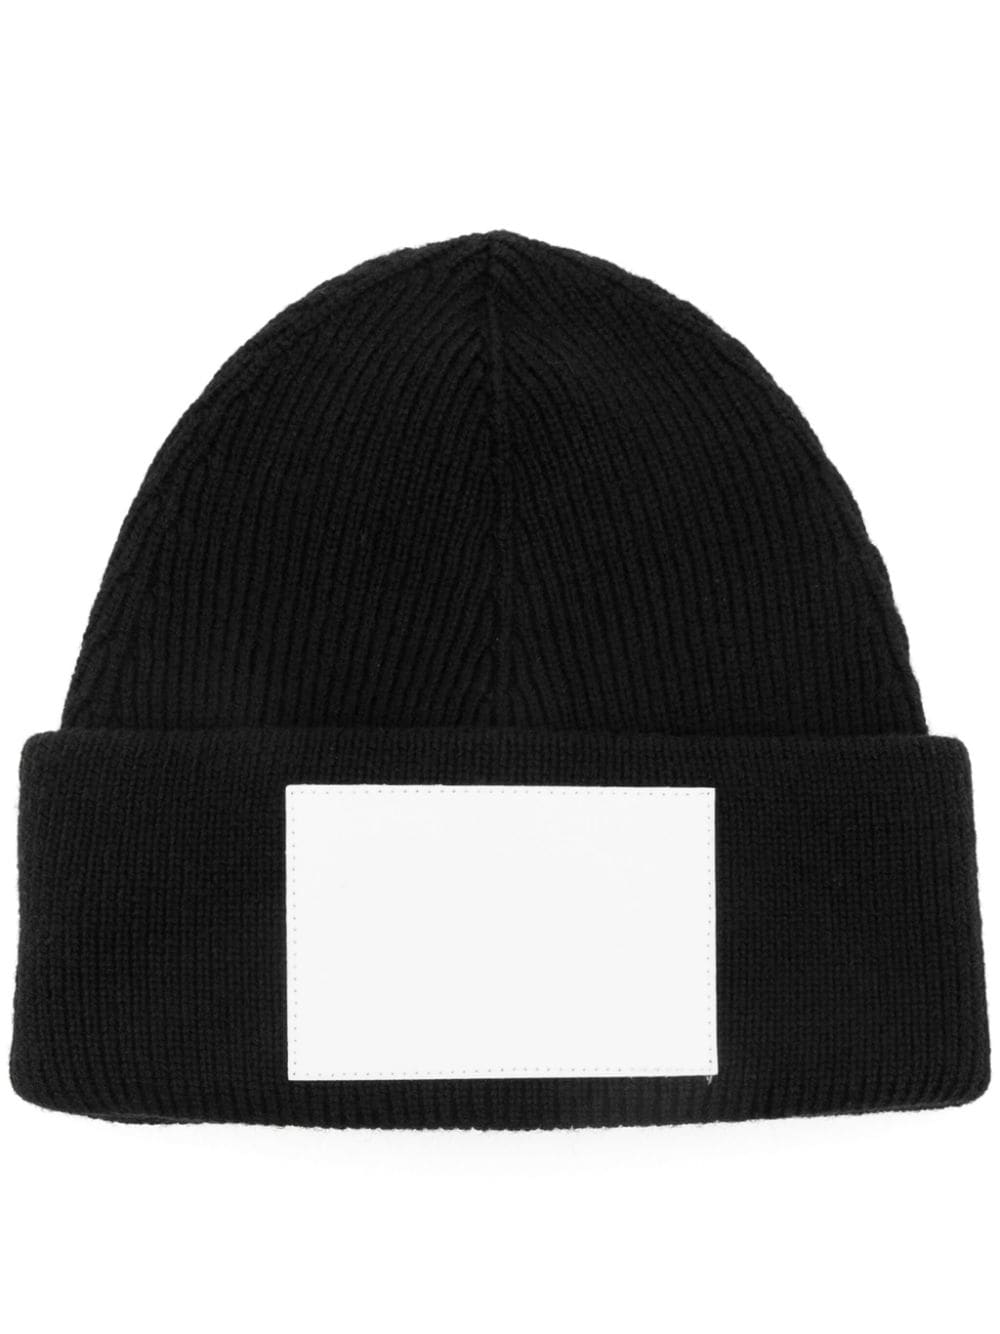 numbers-motif knitted beanie